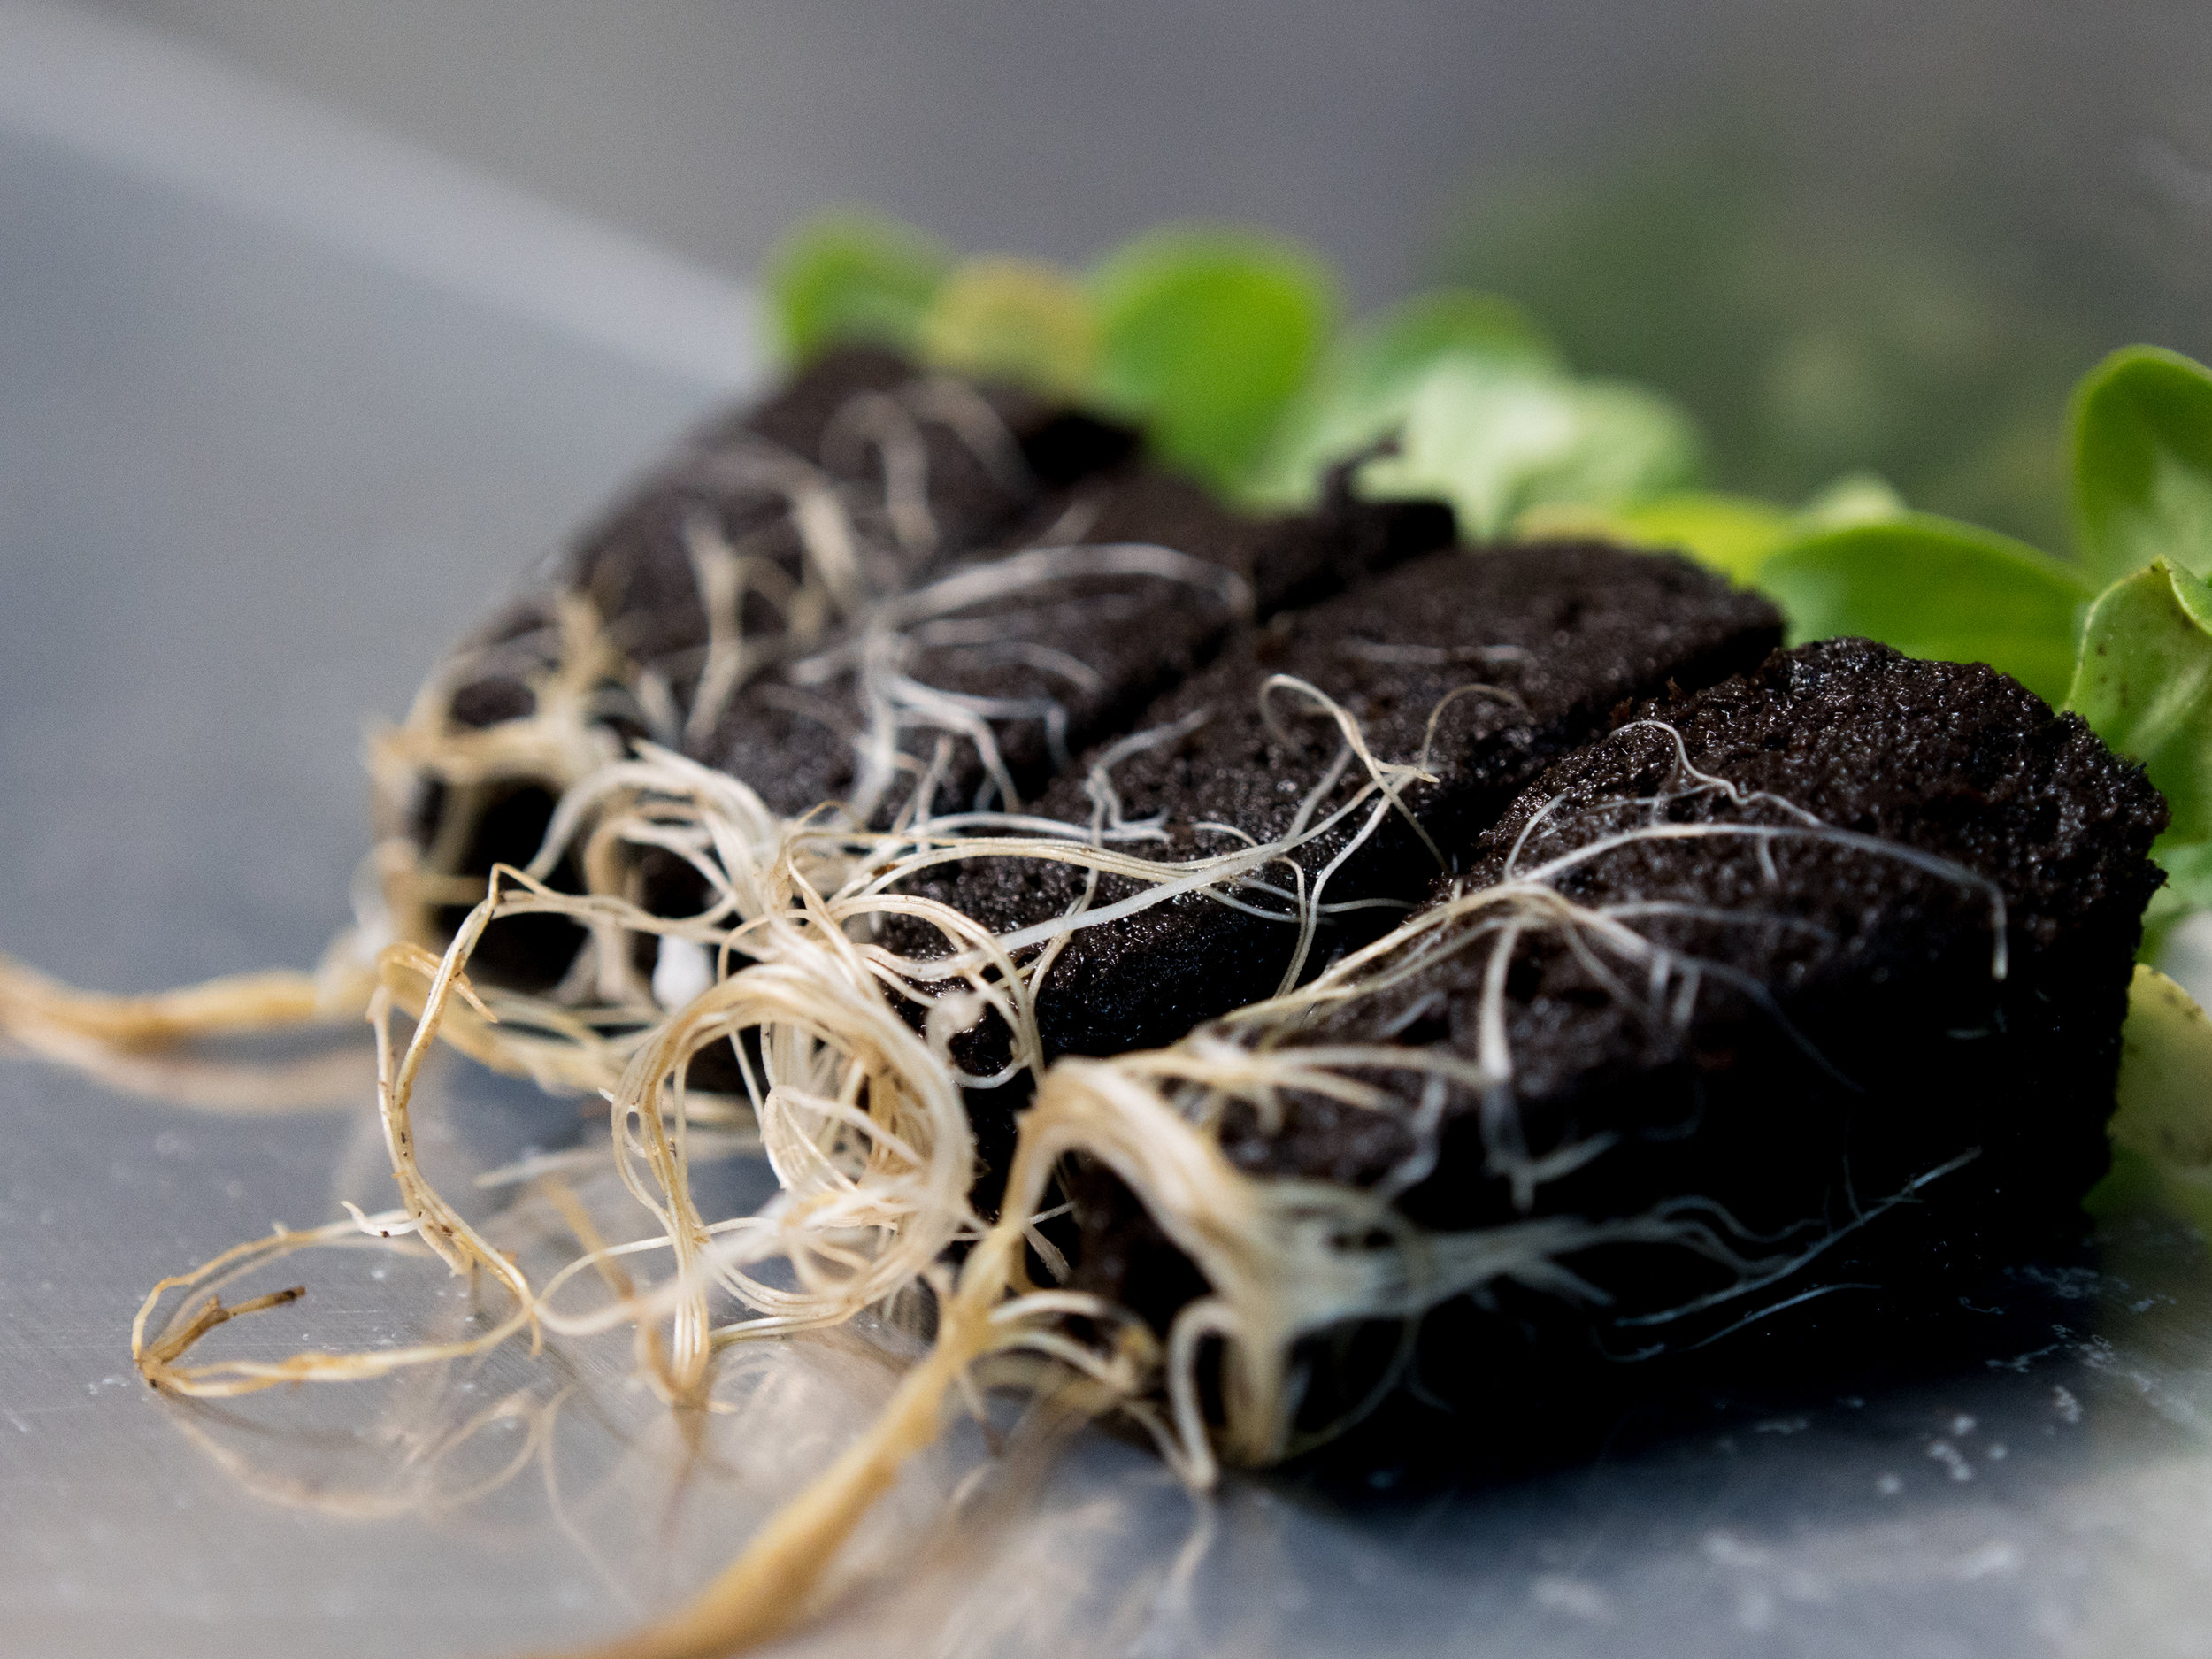 LGM_seedlings_with_roots3.jpg